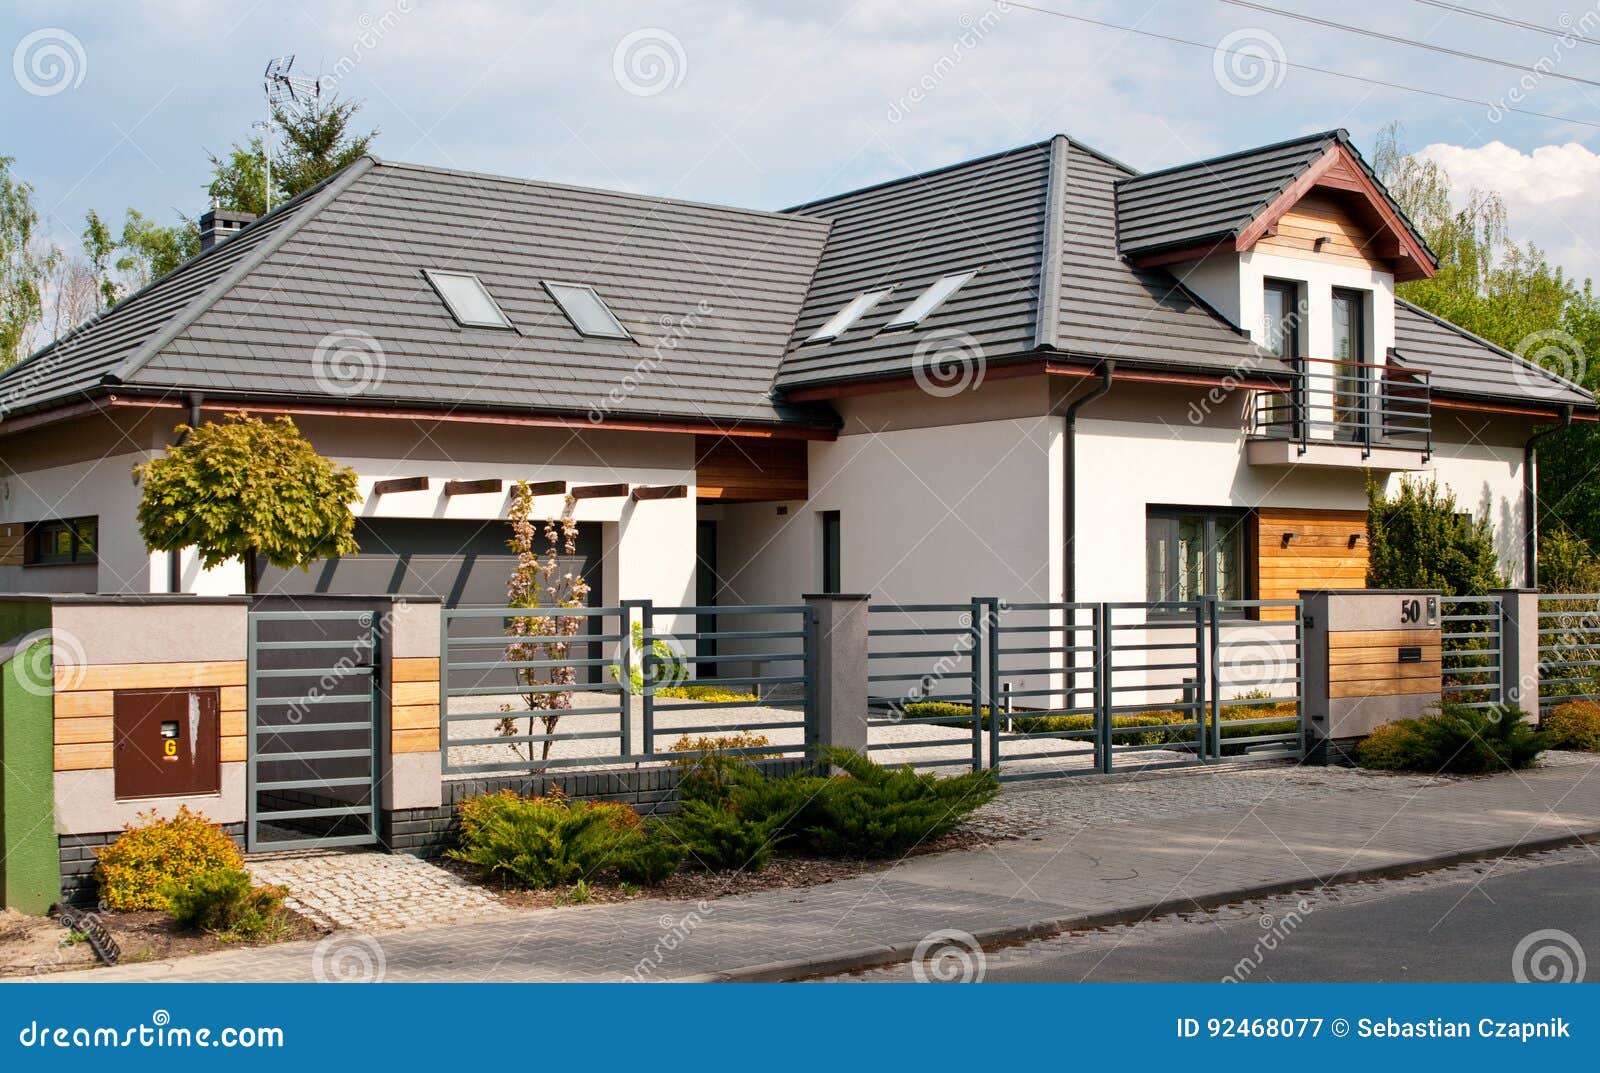 modern private house with horizontal bars grey steel fence